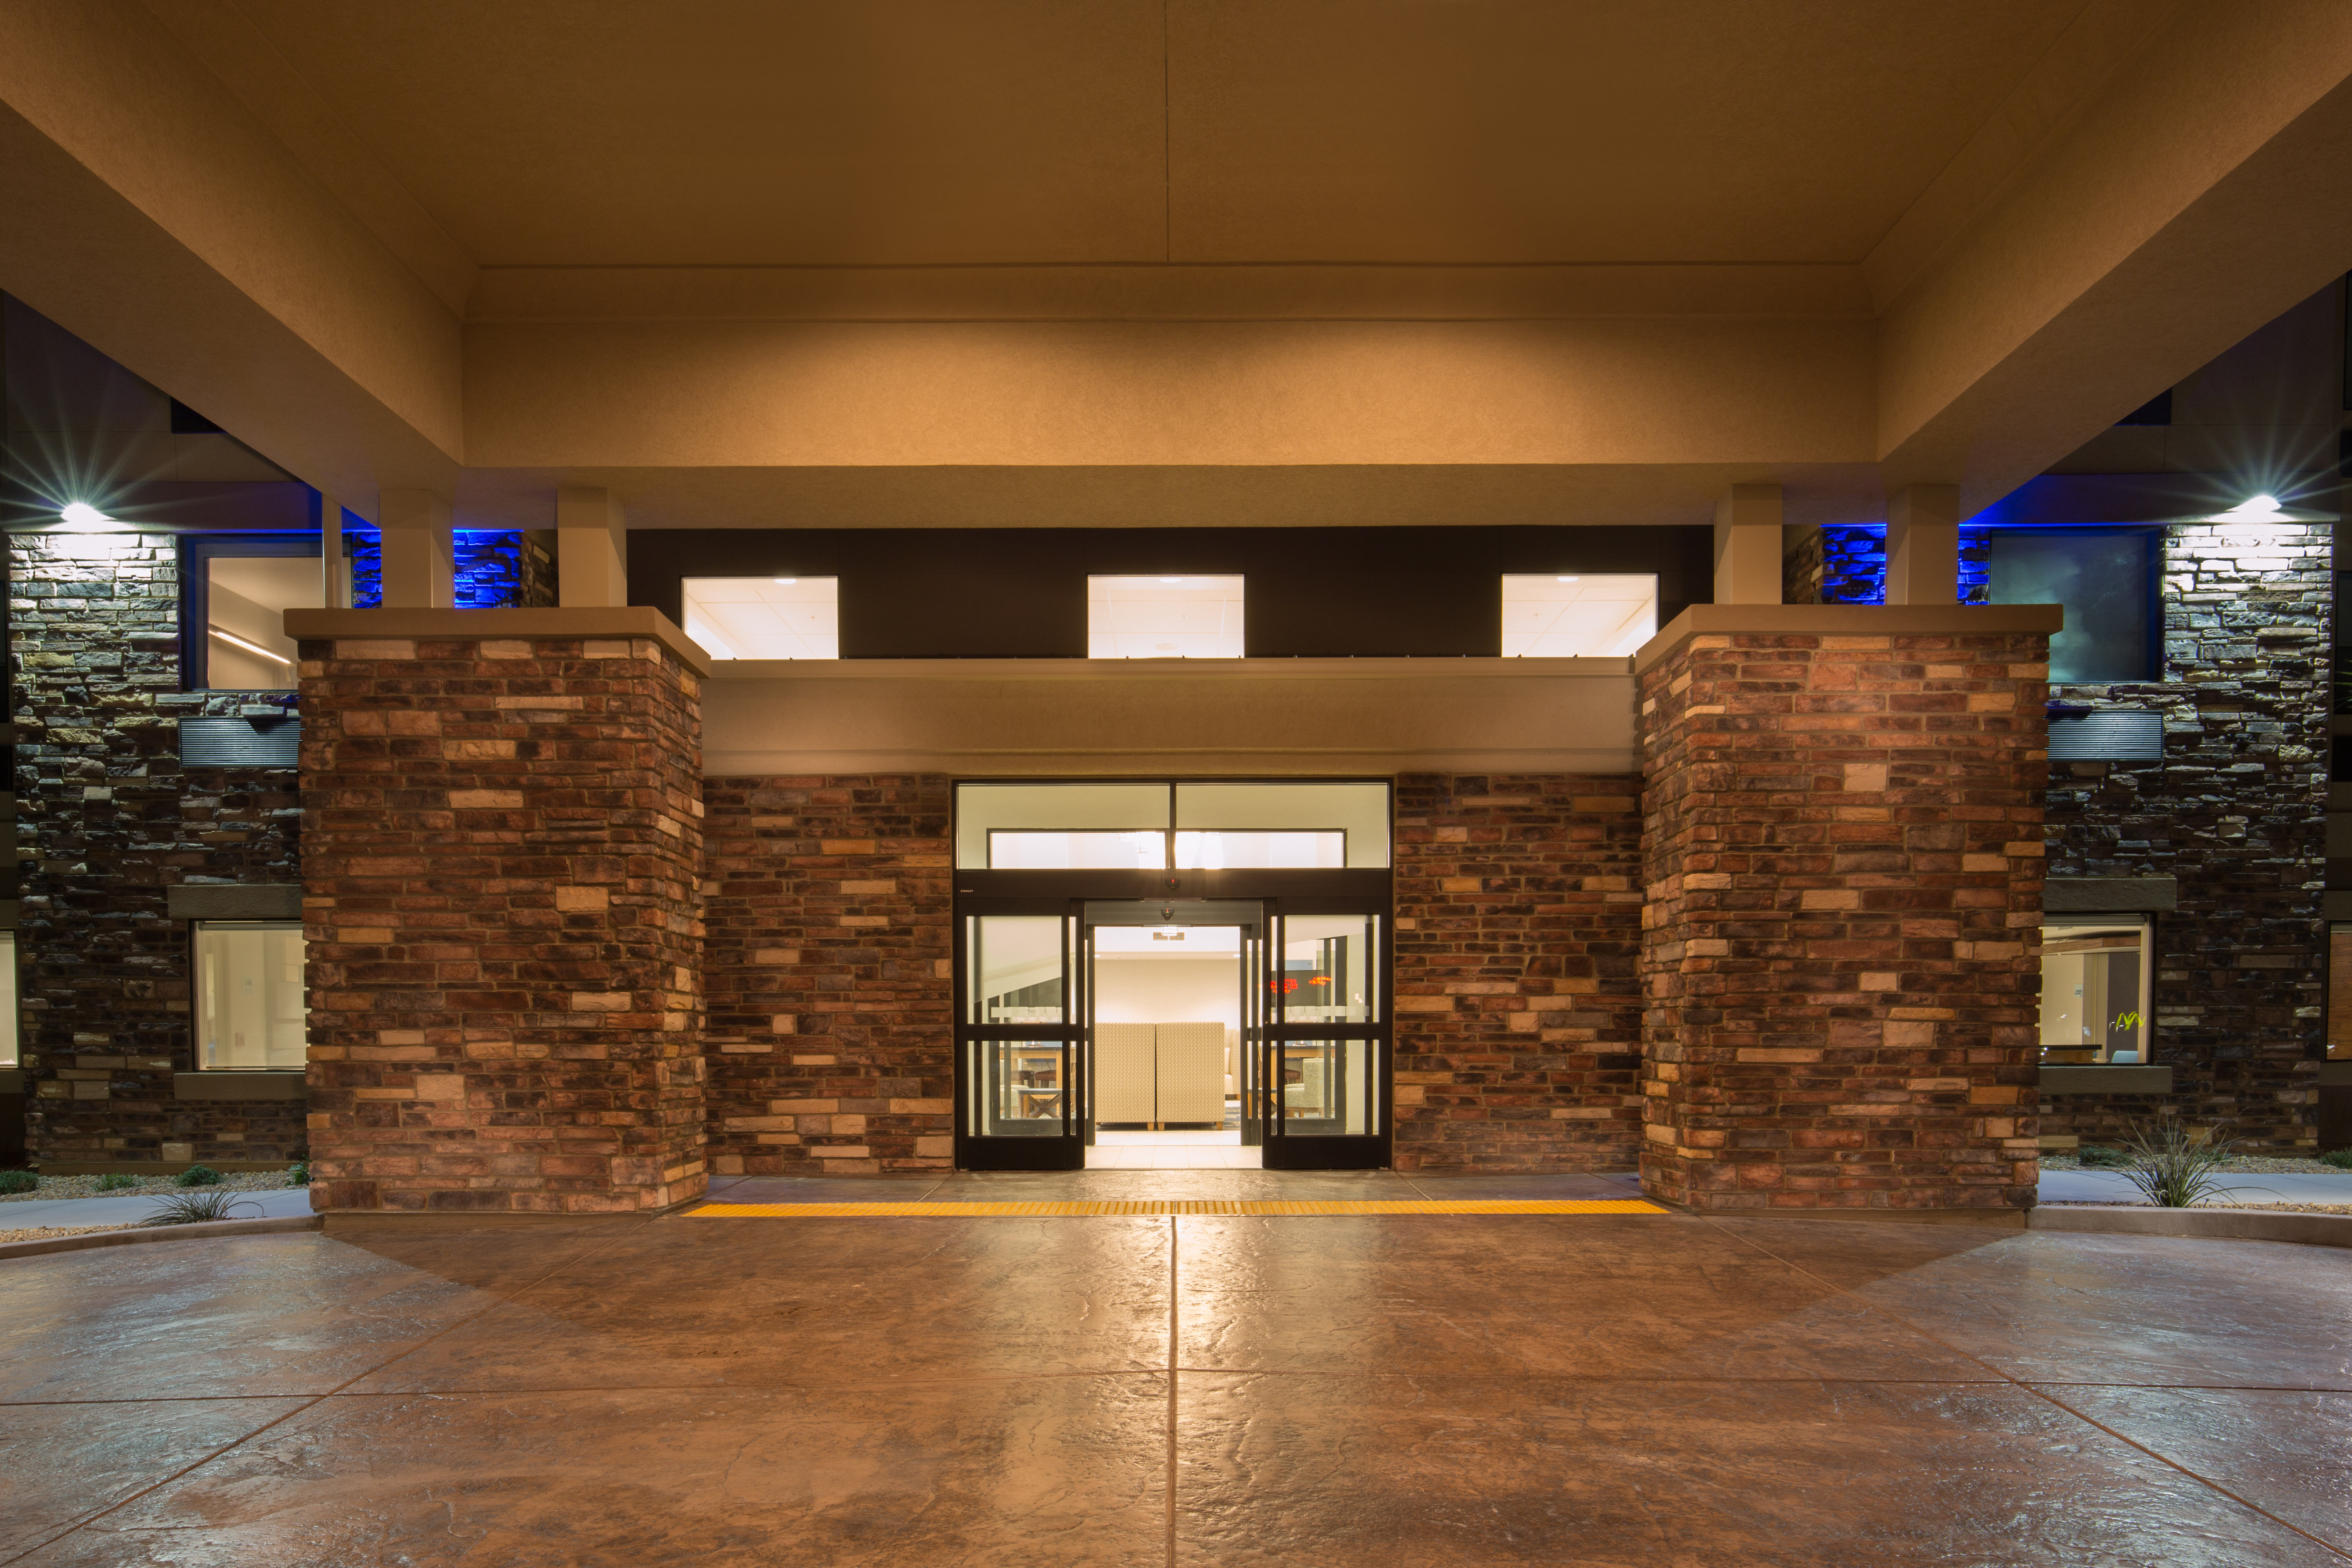 Make the Holiday Inn Express in Pahrump your next destination